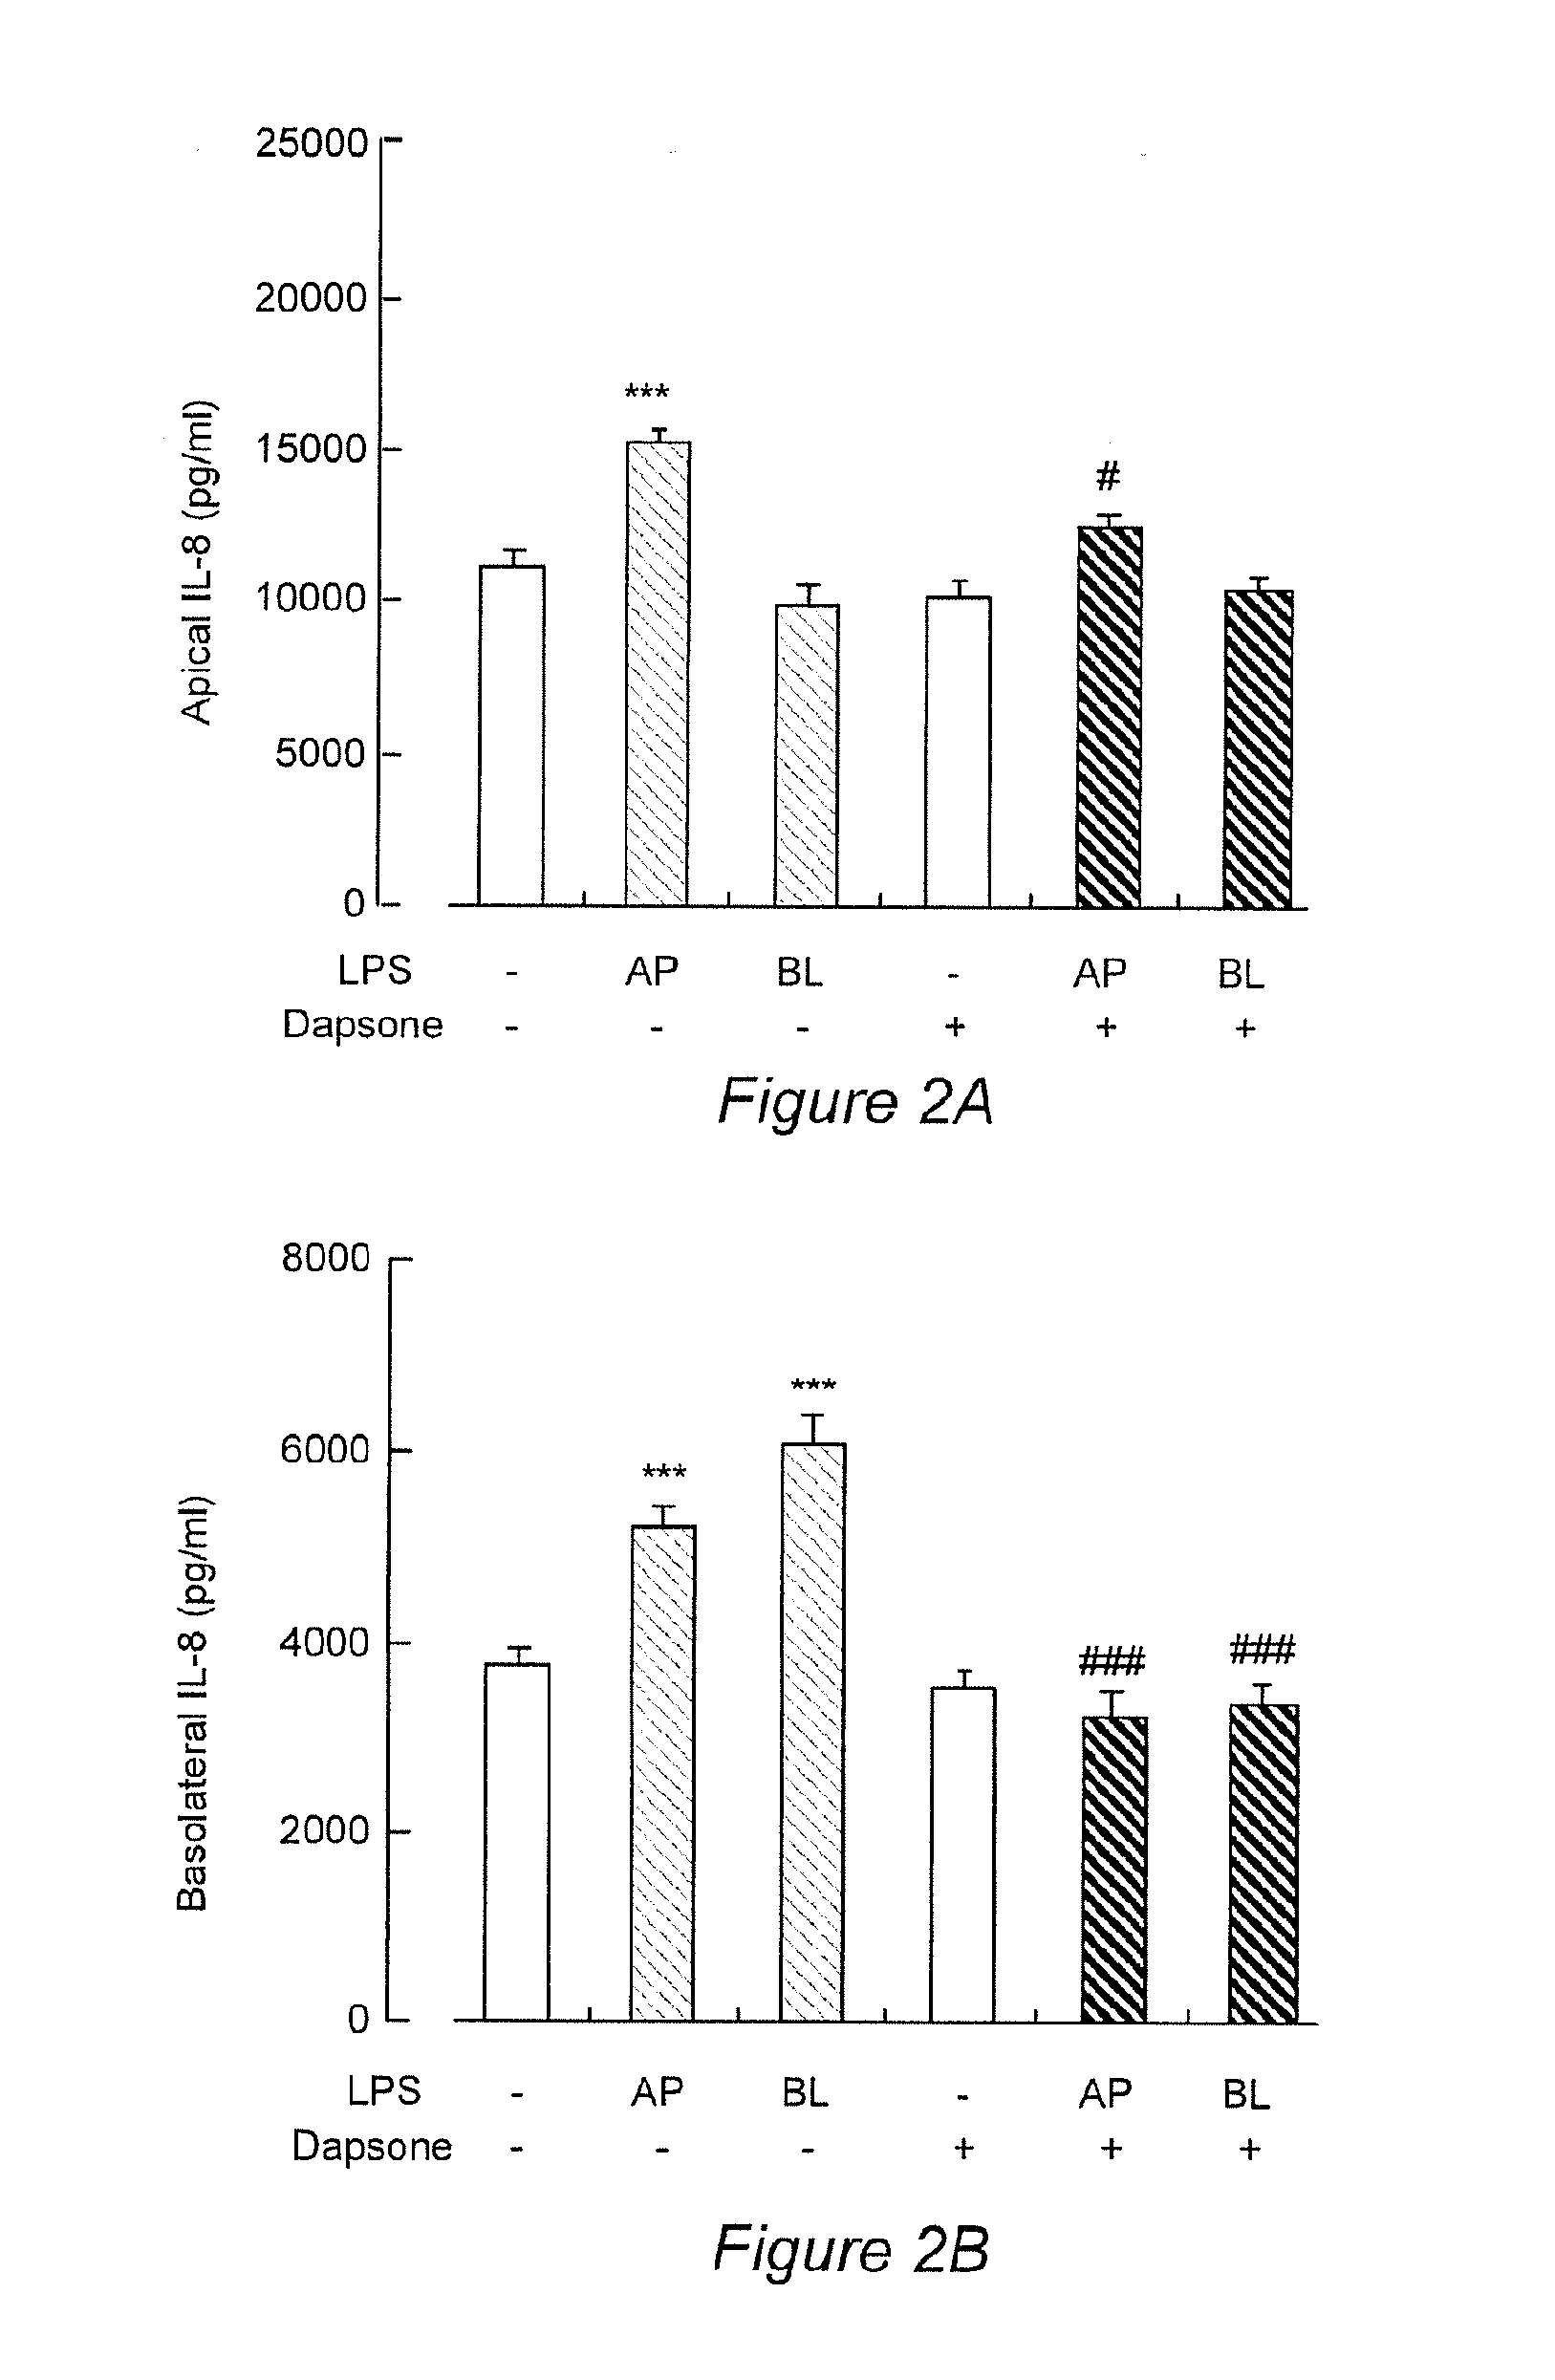 Aerosolized Dapsone as a Therapy for Inflammation of the Airway and Abnormal Mucociliary Transport